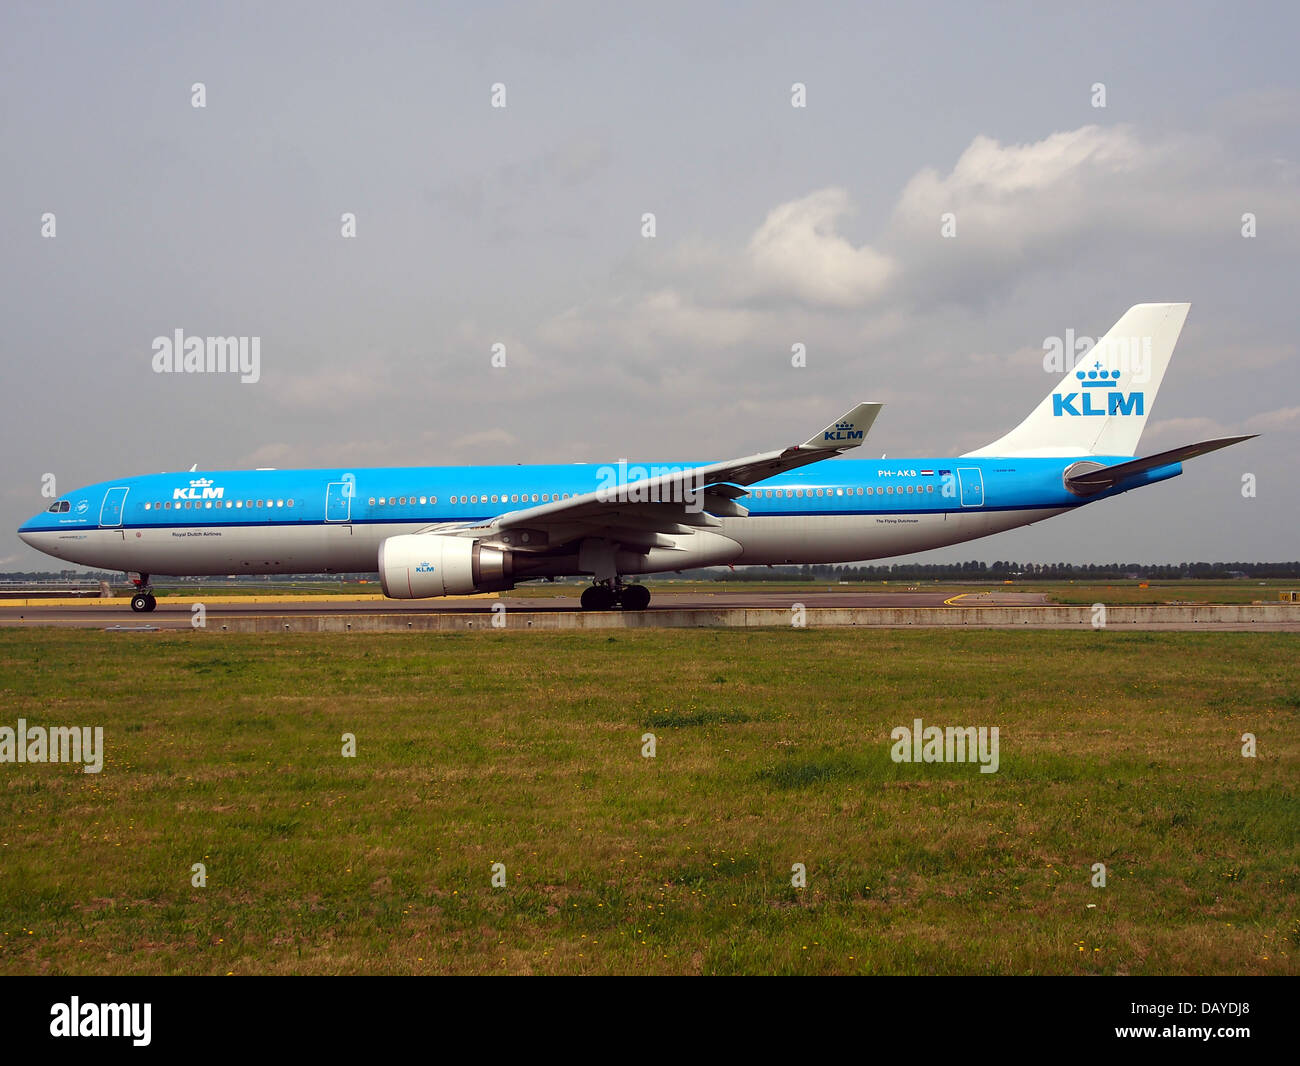 PH-AKB KLM Royal Dutch Airlines Airbus A330-303, 14 july 2013 3 Stock Photo